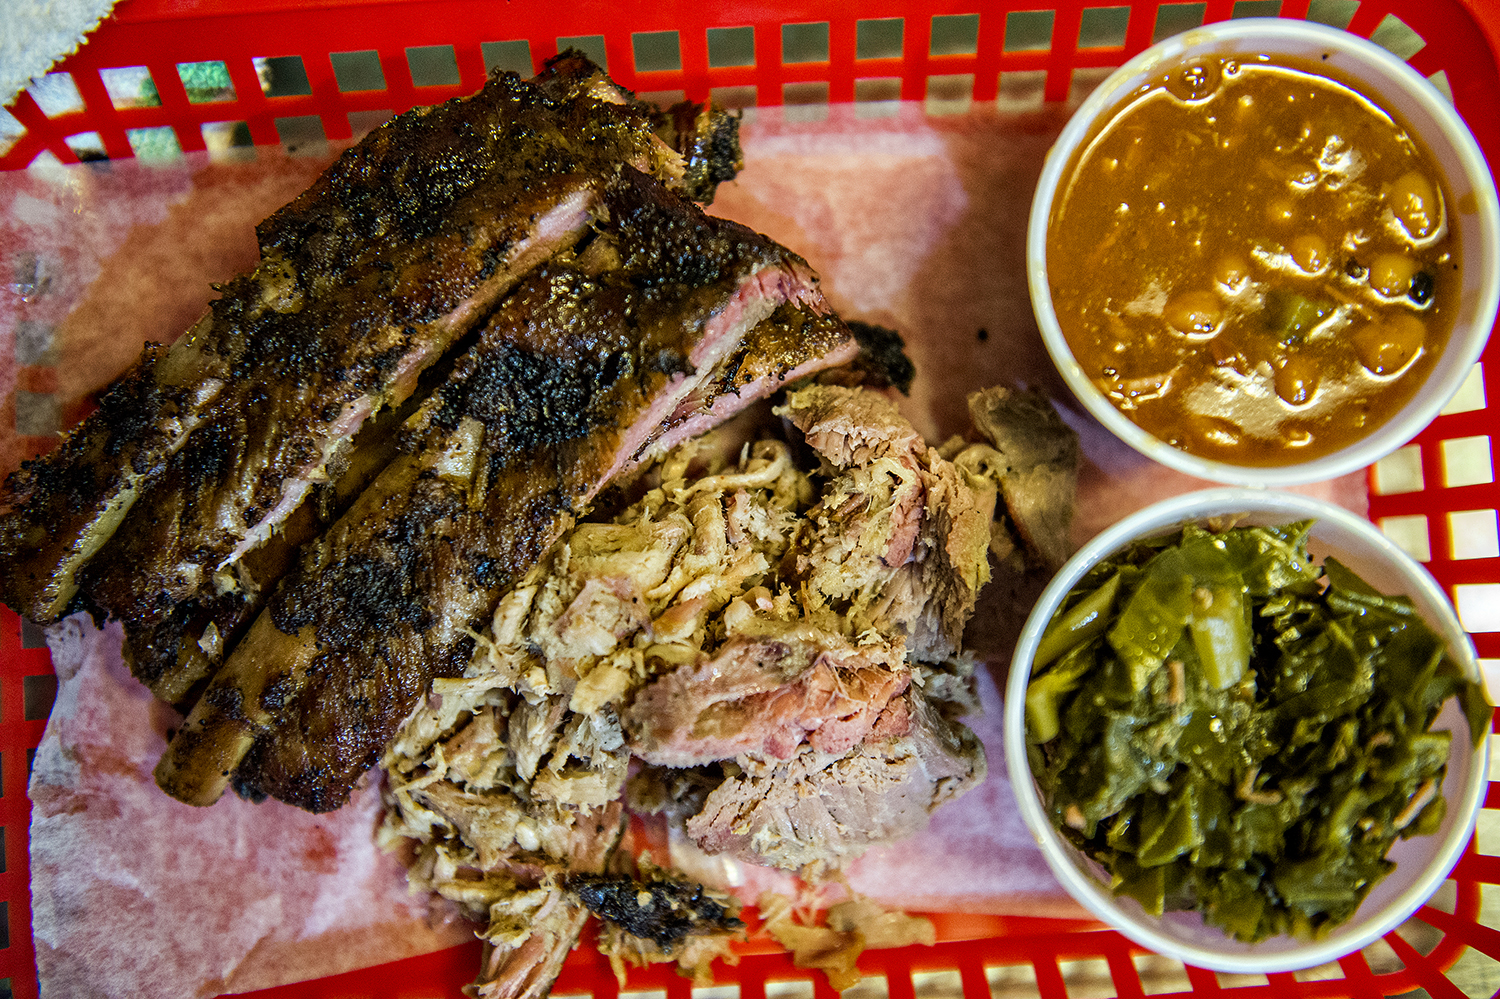 A plate of ribs, chopped whole hog, barbecue beans, and greens.